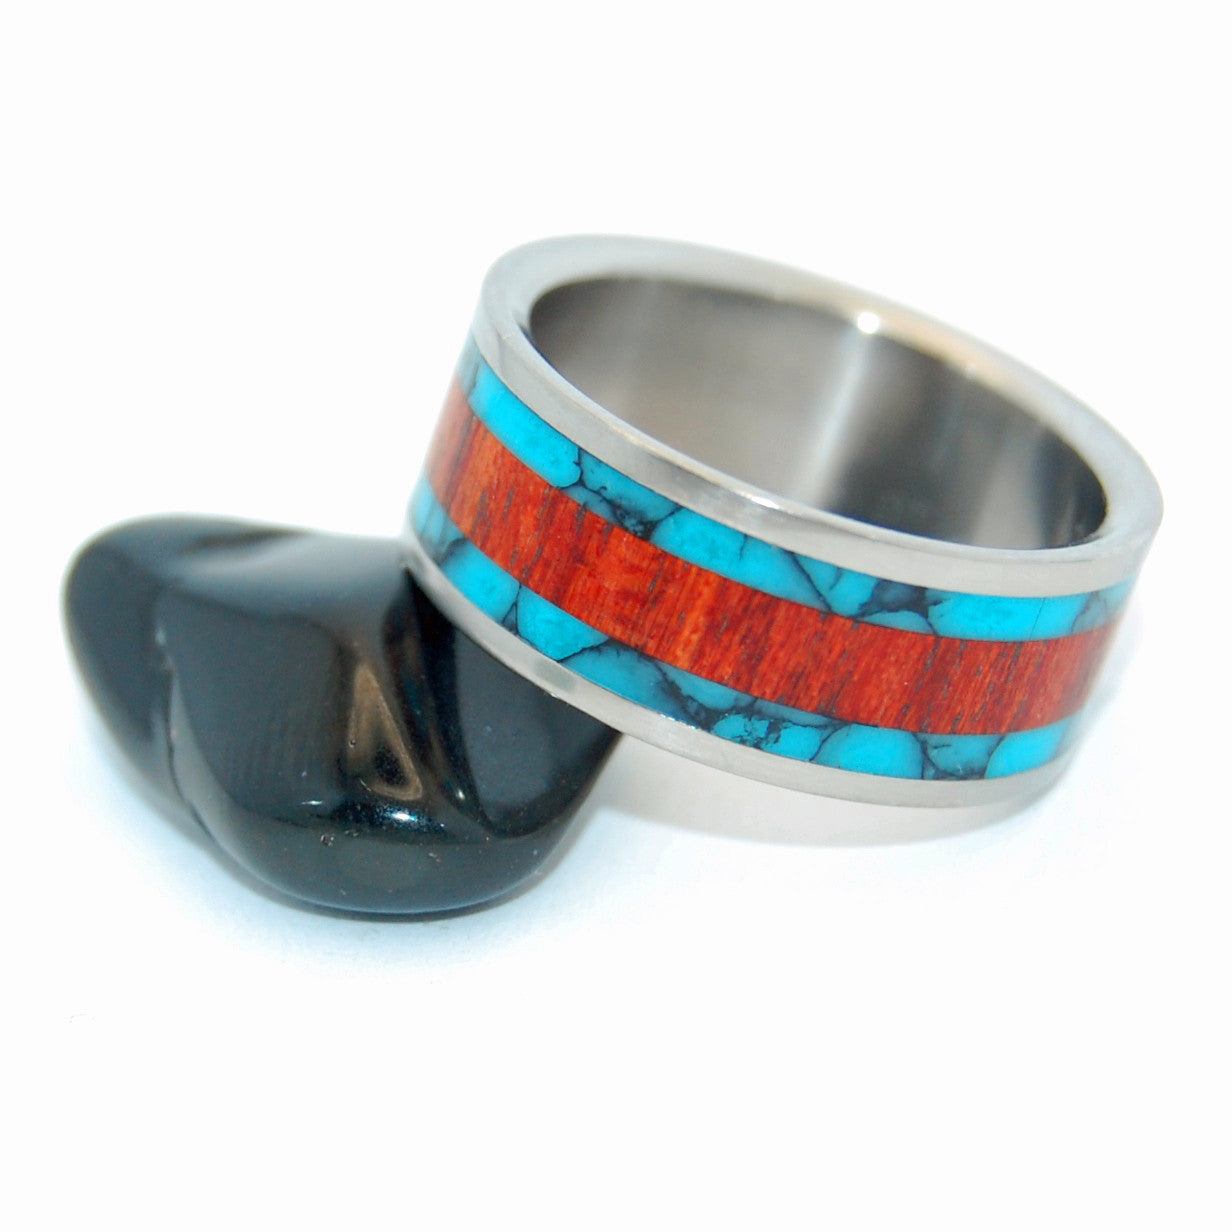 THE RING THAT JACK BUILT | Turquoise & Bloodwood Titanium Wedding Rings - Minter and Richter Designs